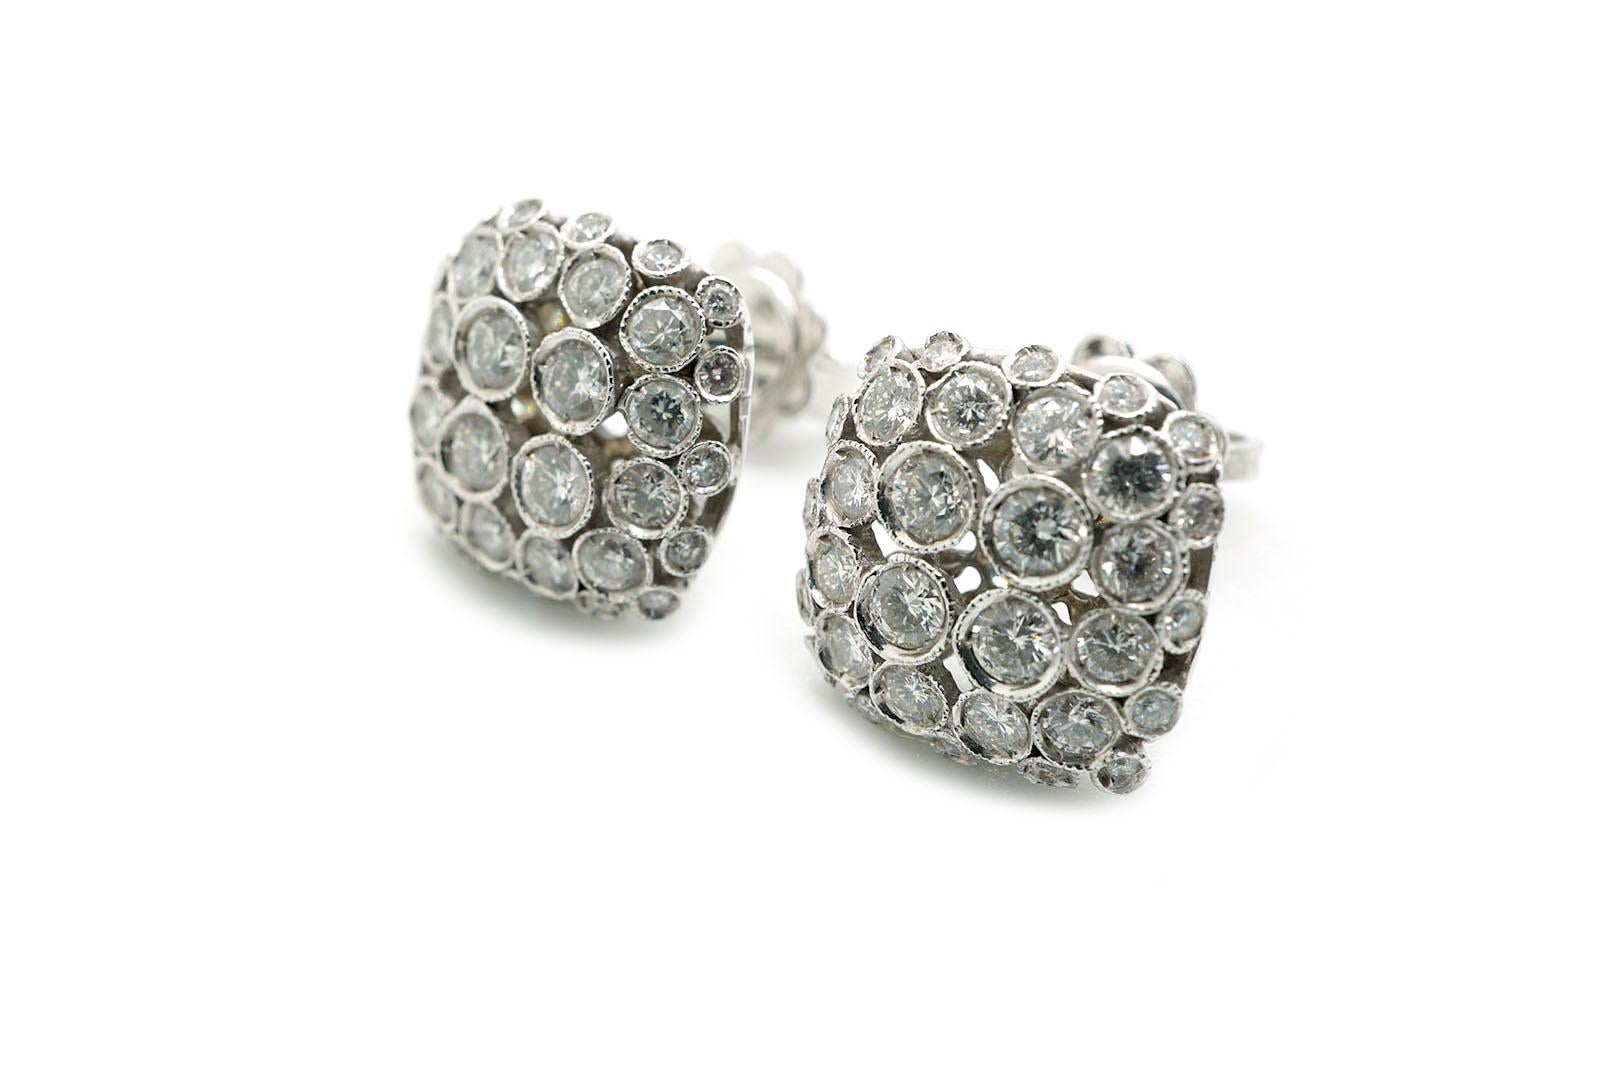 18 Kt White Gold and Diamonds Deco Style Stud Earrings In New Condition For Sale In Cattolica, IT